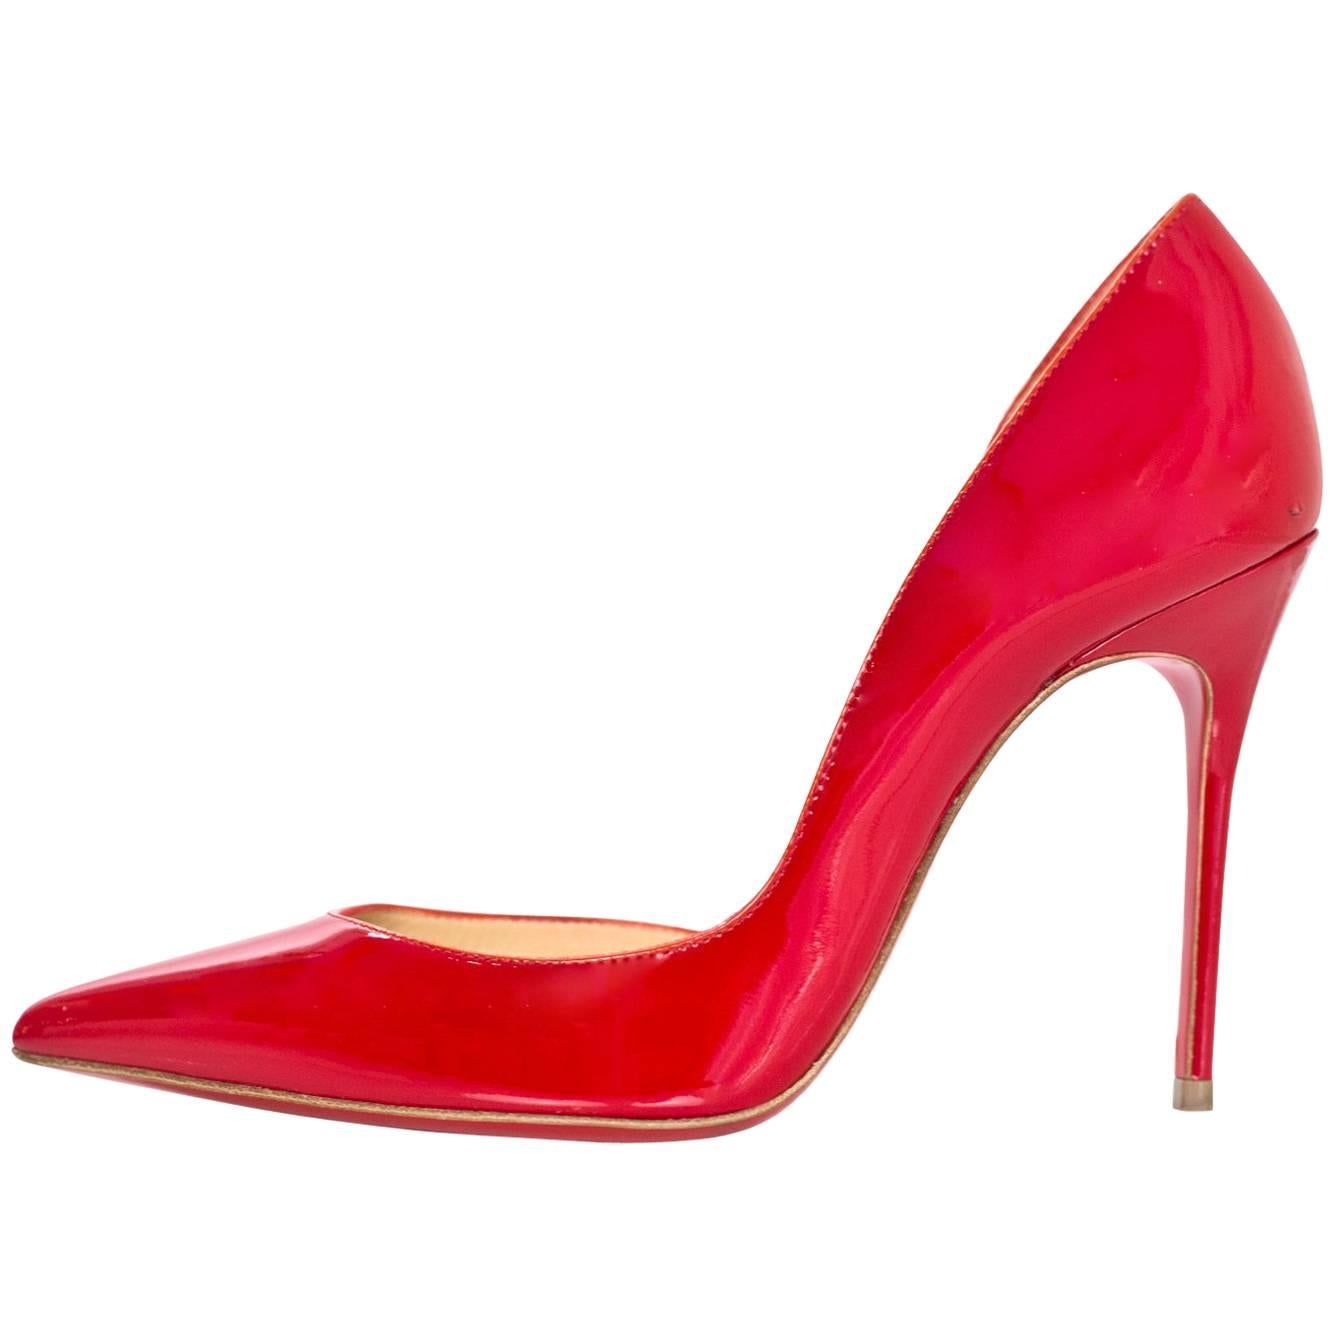 10/5 Christian Louboutin Red Patent Iriza d'Orsay Pumps Sz 36 with DB